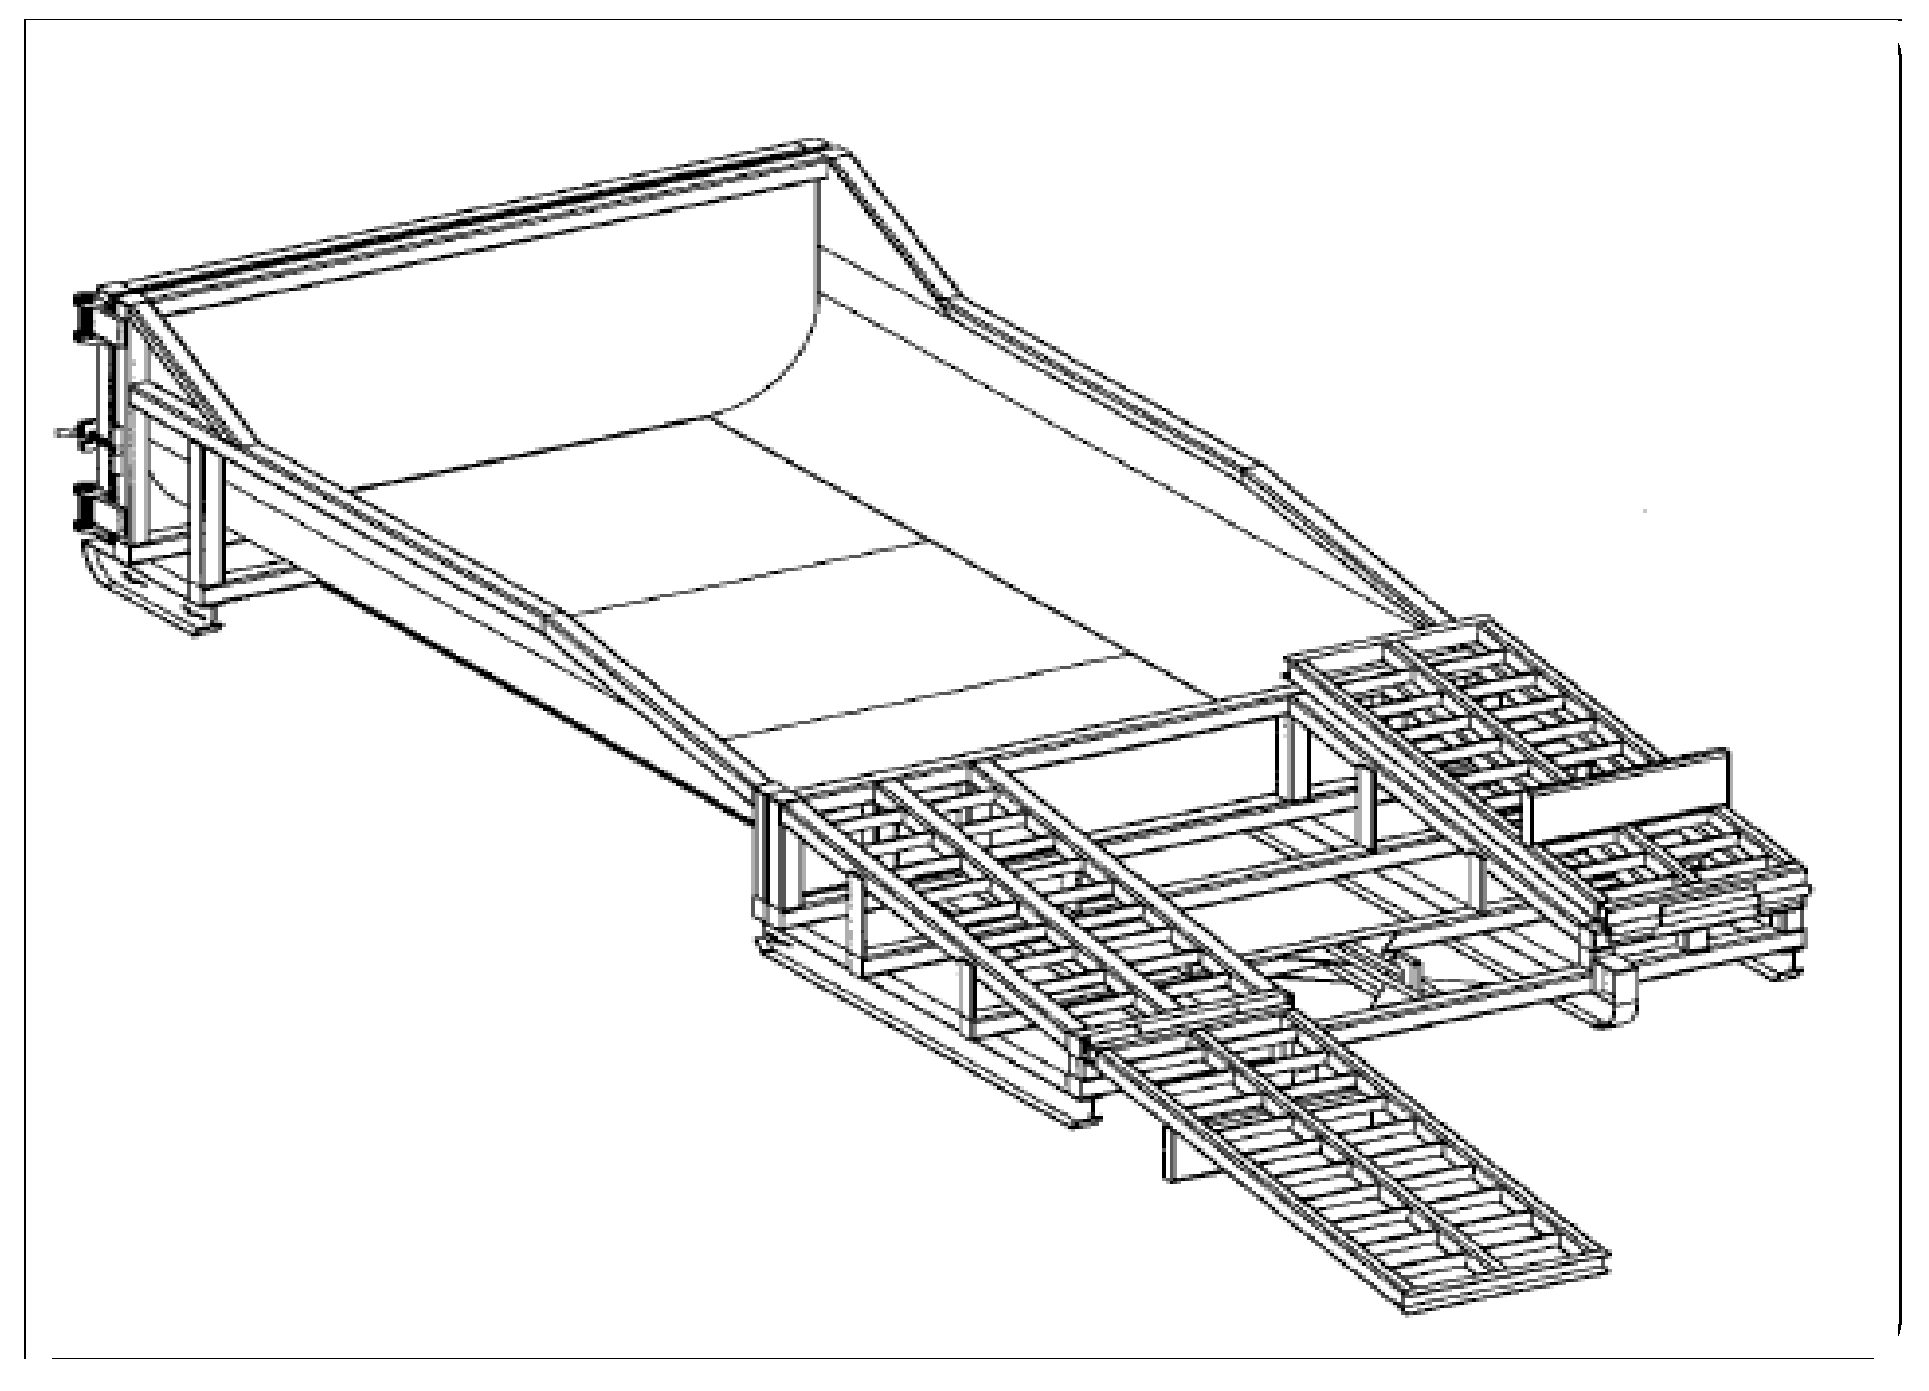 Figure 3-8 Prefabricated Concrete Washout Container with Ramp